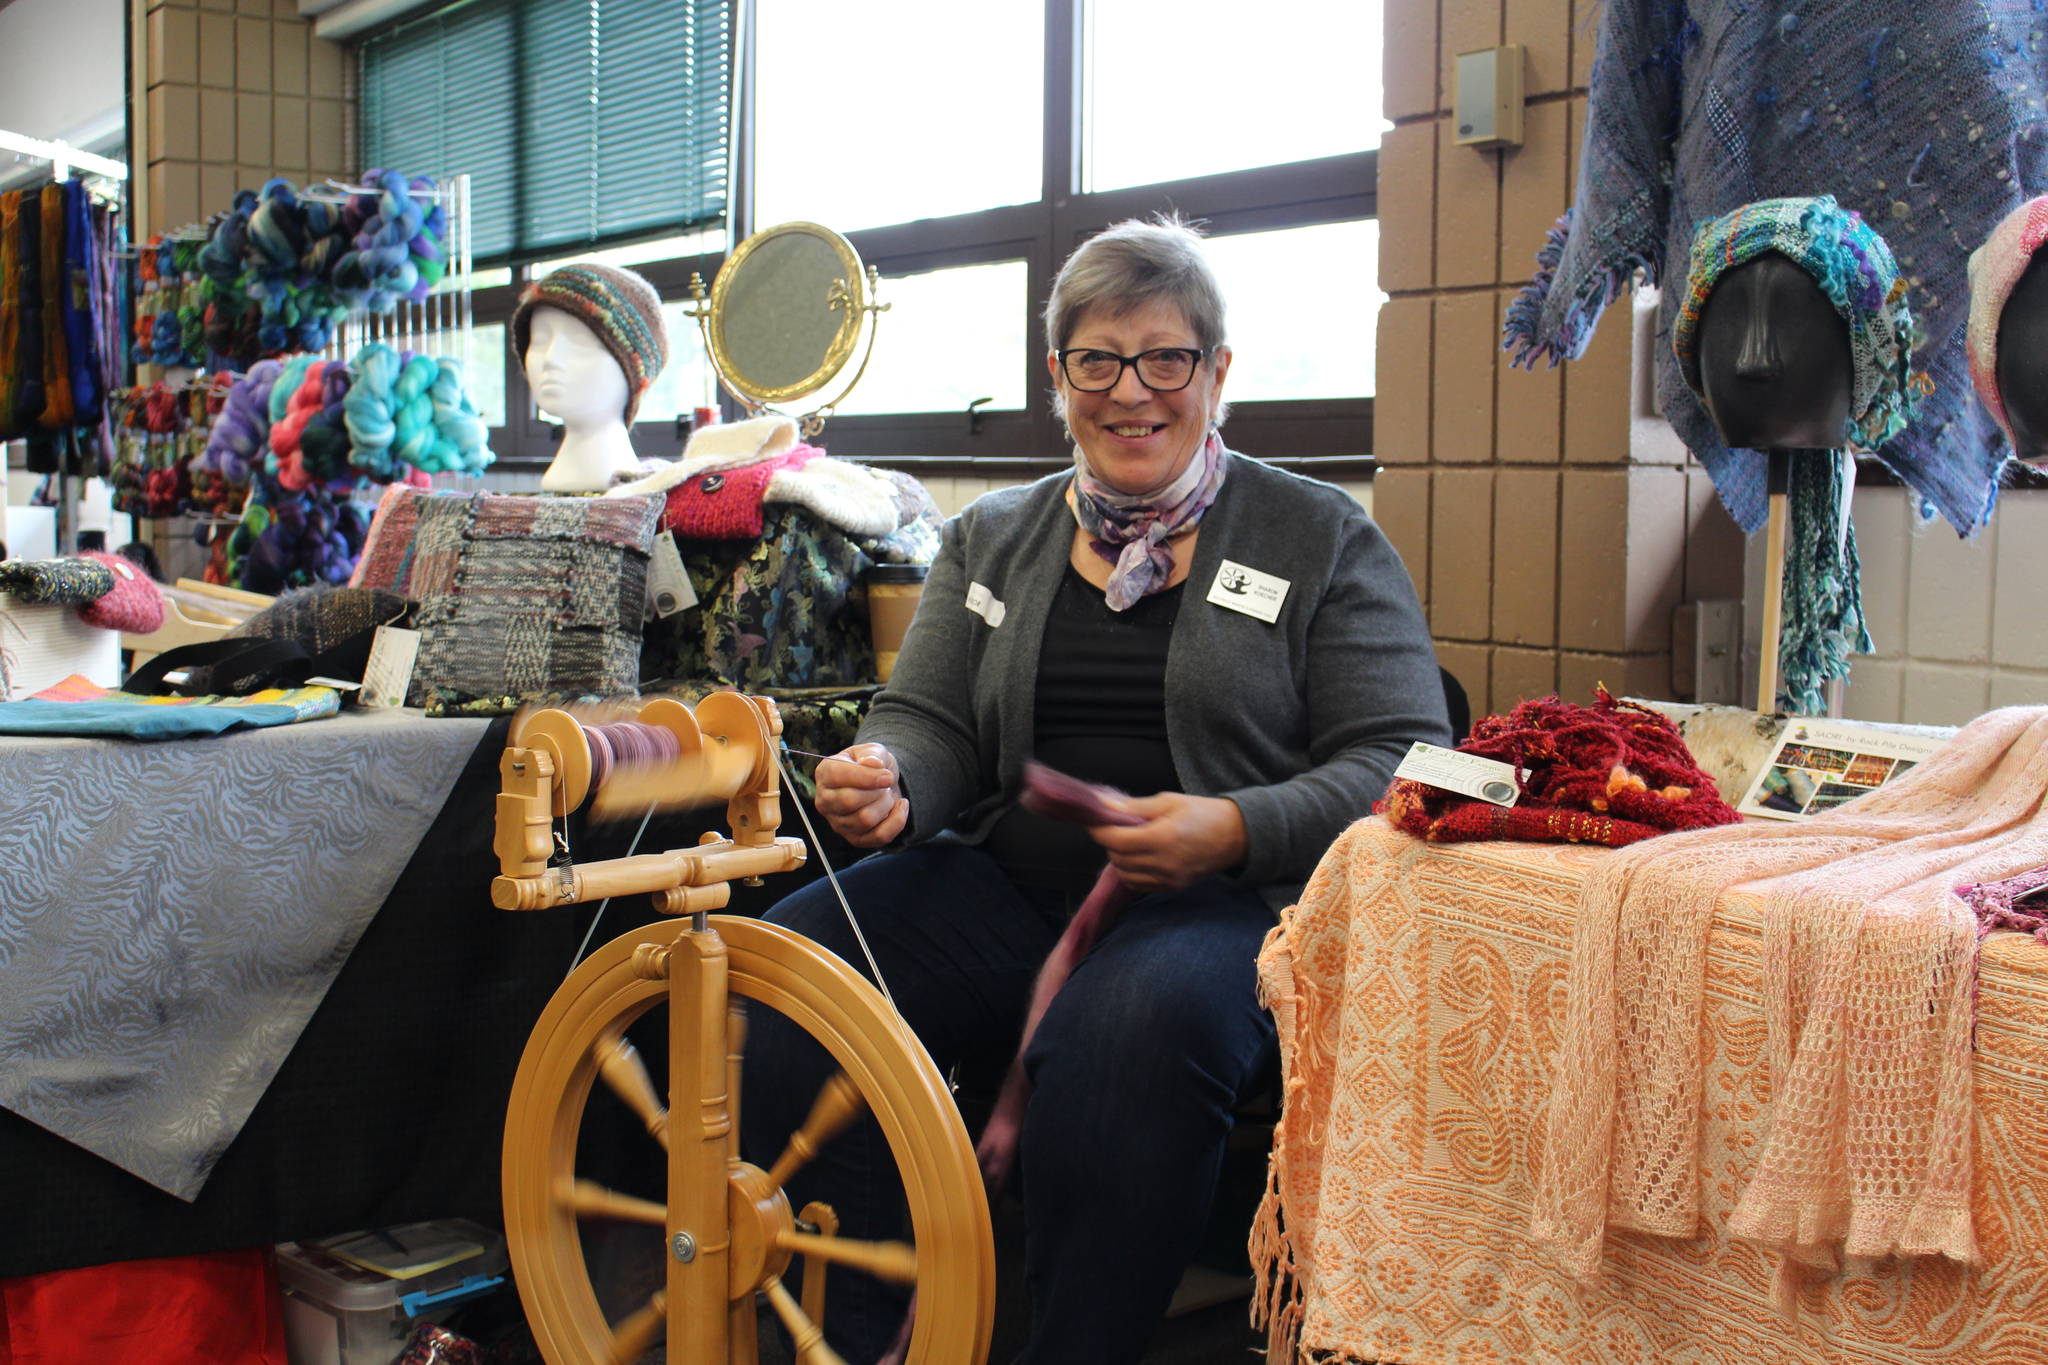 Sharon Koecher sits at her spinning wheel and shows off her wares during the Fireweed FiberFest at the Soldotna Regional Sports Complex in Soldotna, Alaska on Sept. 28, 2019. (Photo by Brian Mazurek/Peninsula Clarion)